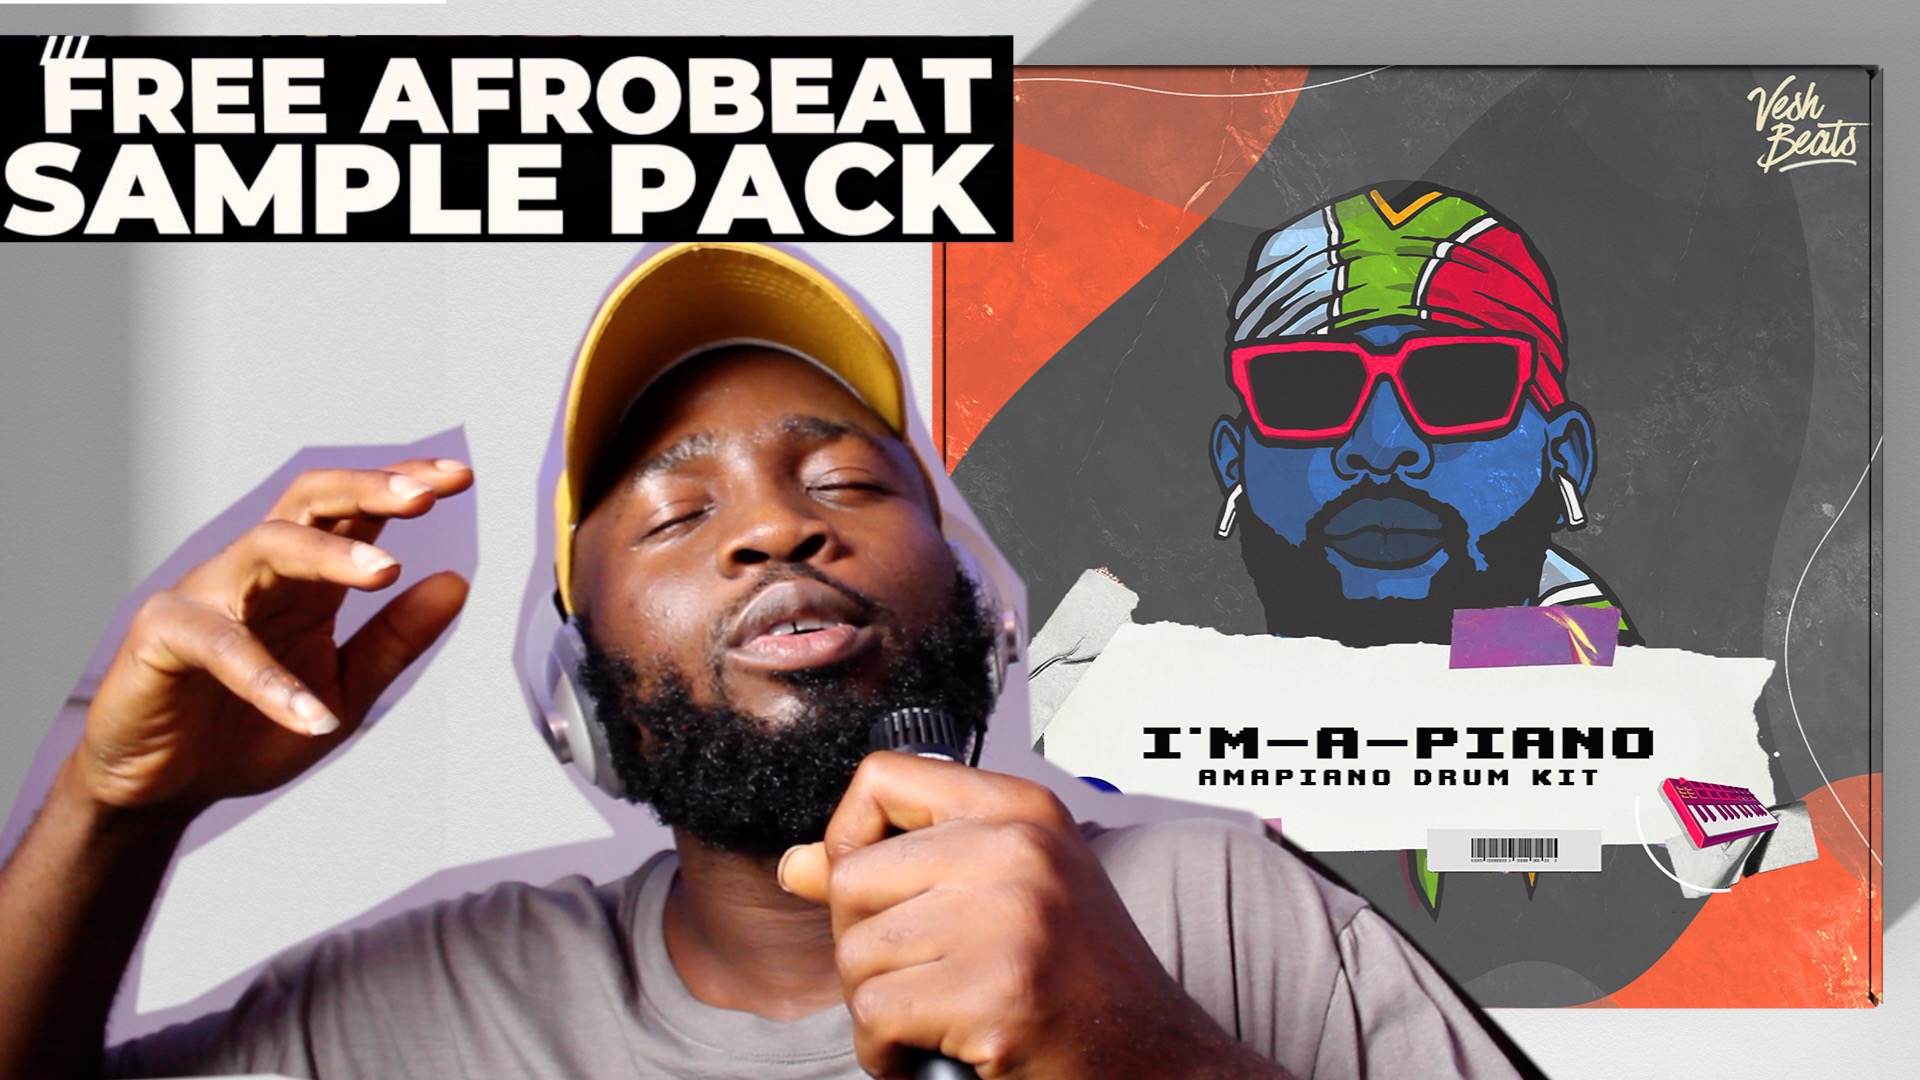 FREE DOWNLOAD AMAPIANO AFROBEAT PACK I'M A PIANO DRUM KIT, DRUMS AND